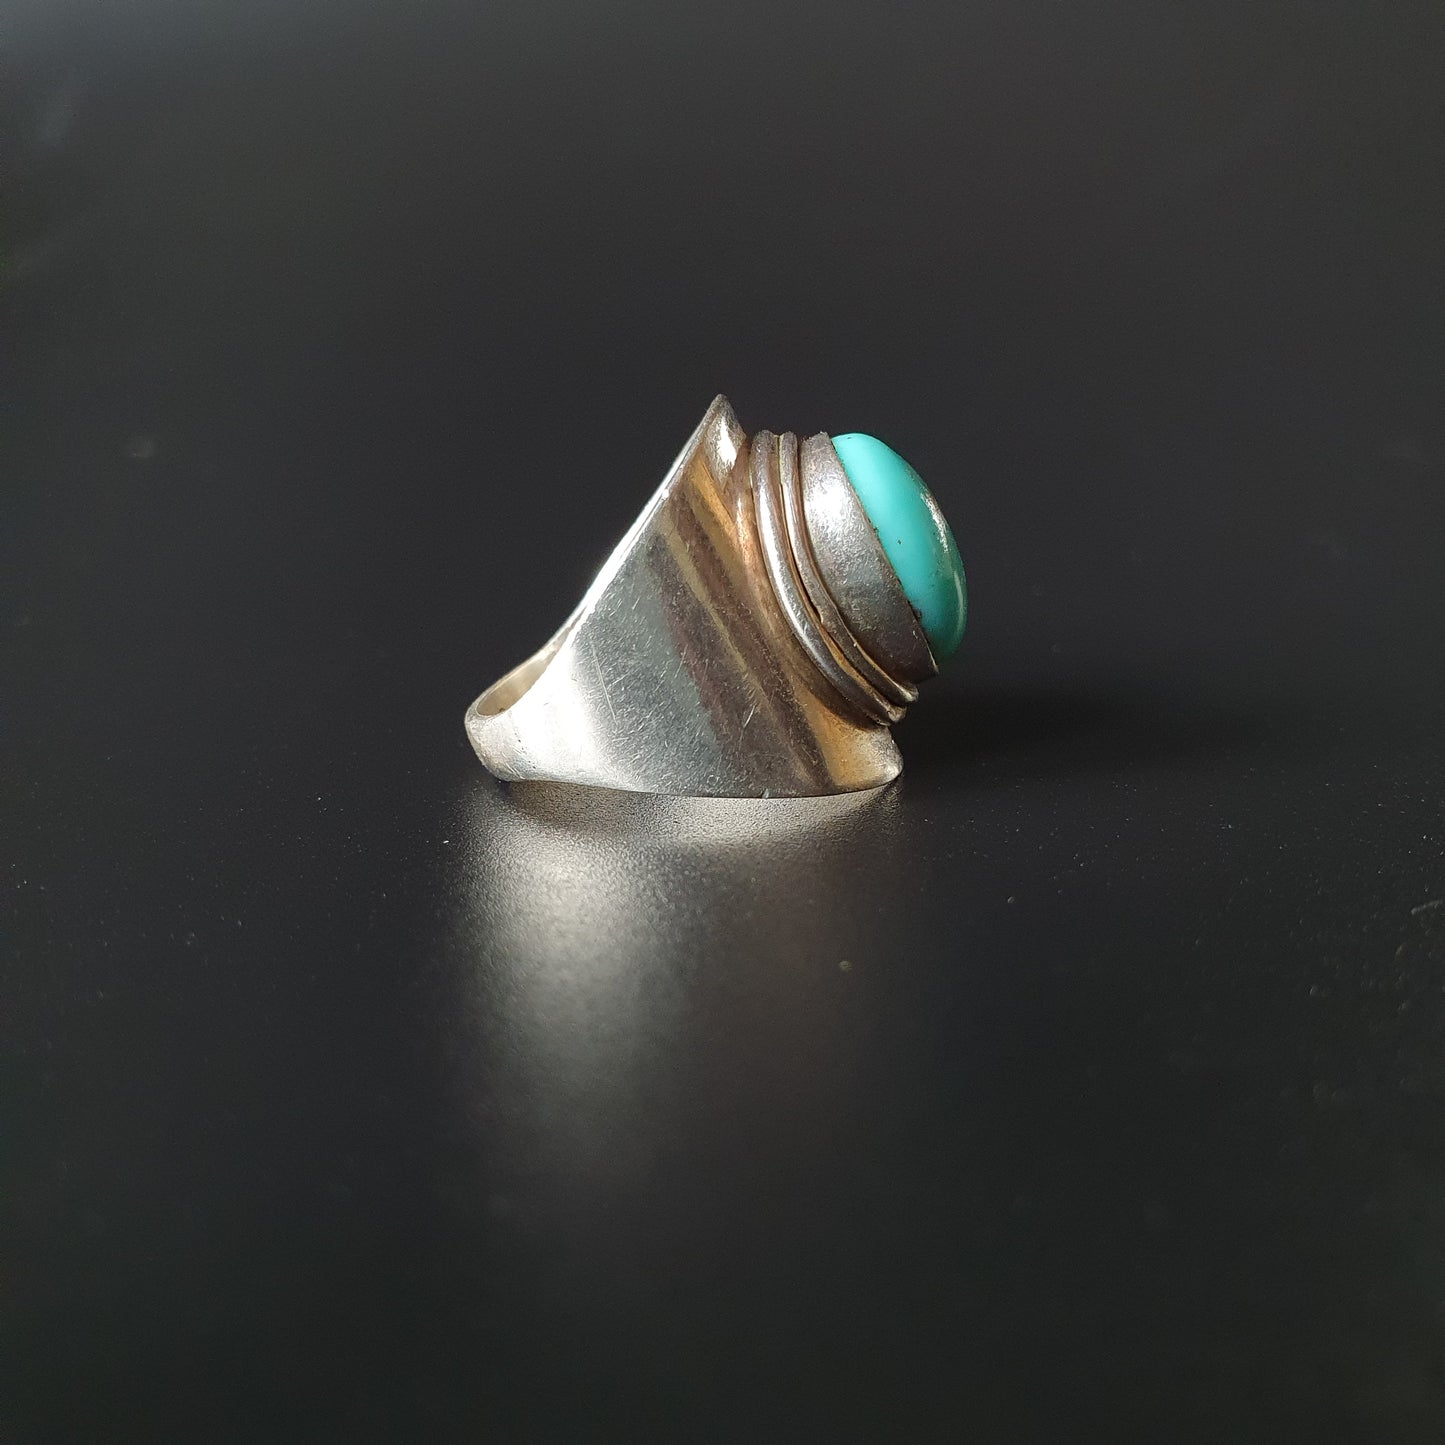 Antique ring Solid sterling silver with turquoise gemstones middle Eastern